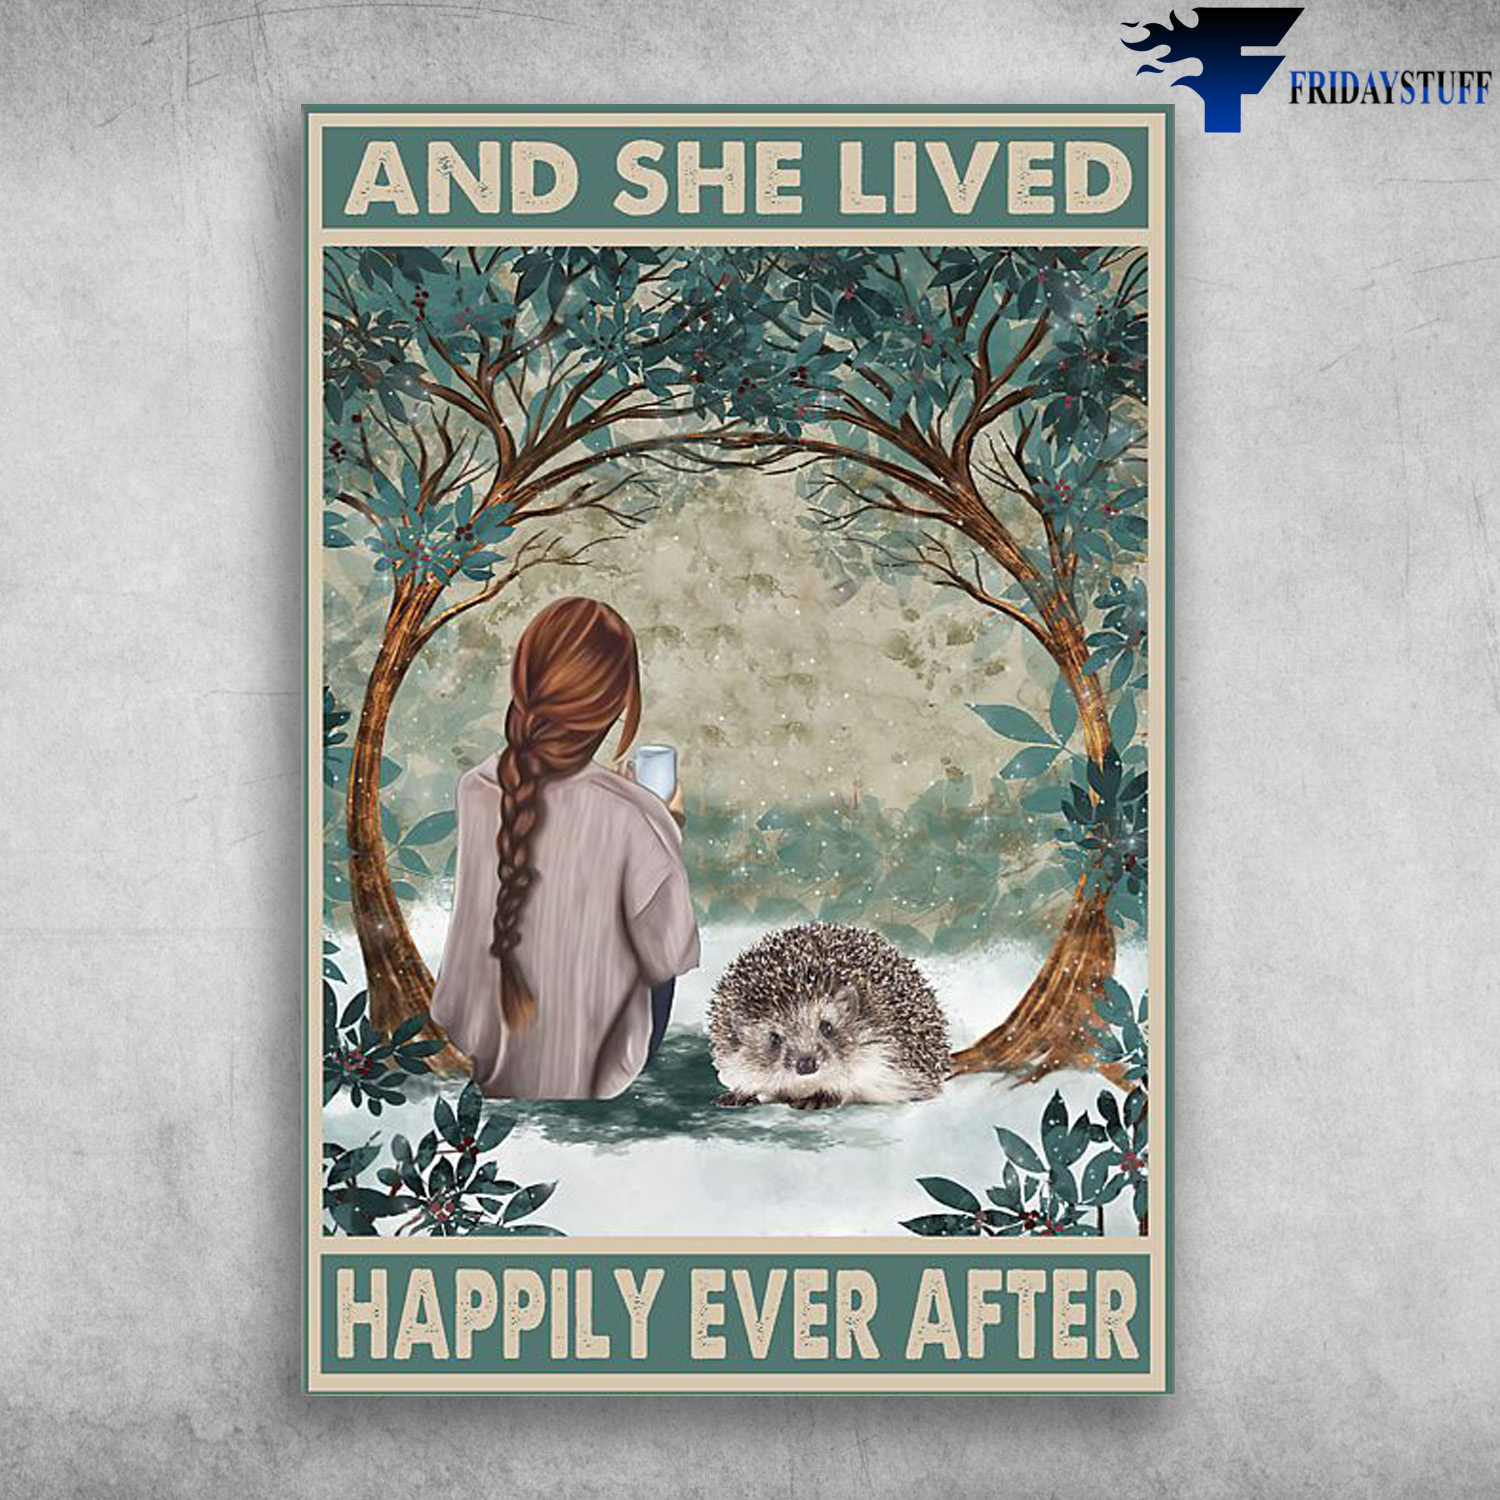 Girl And Hedgehog - And She Lived, Happily Ever After